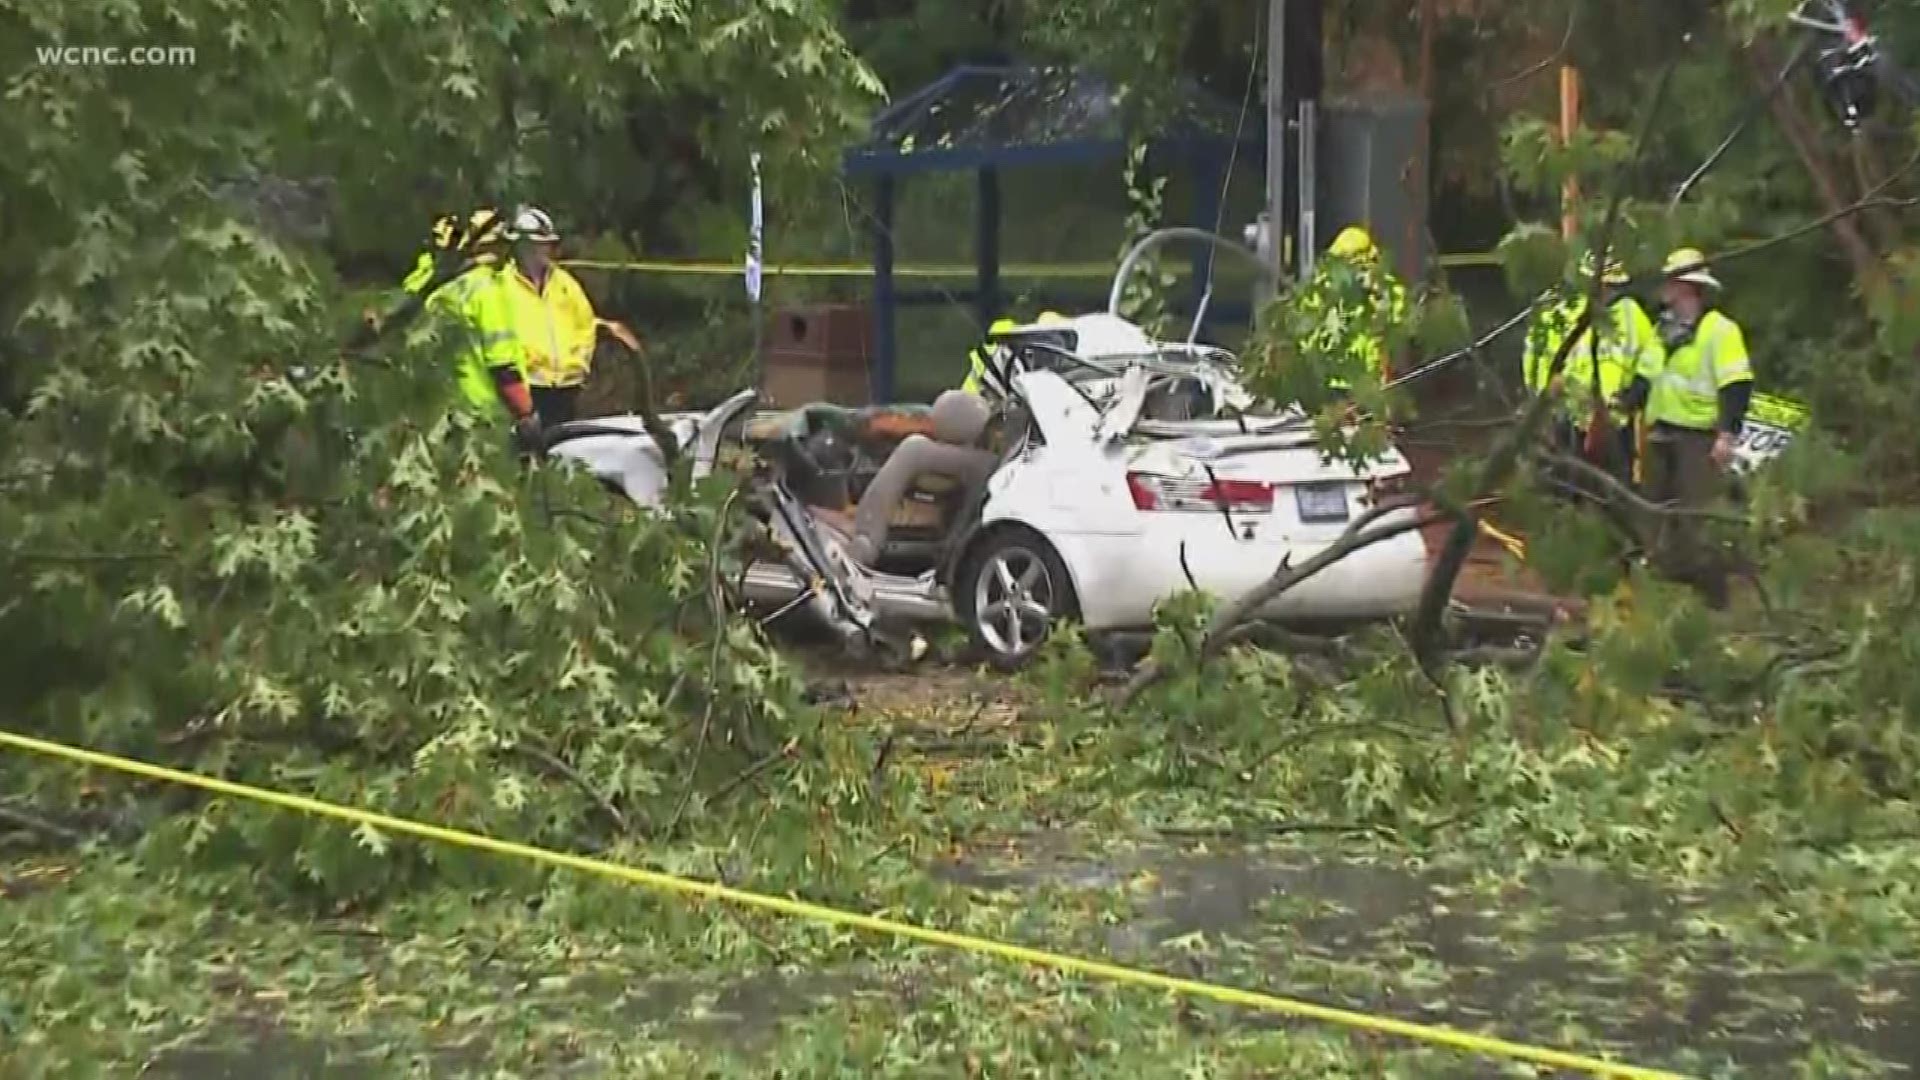 CMPD has part of a road closed after a tree fell onto a car, seriously injuring one person.